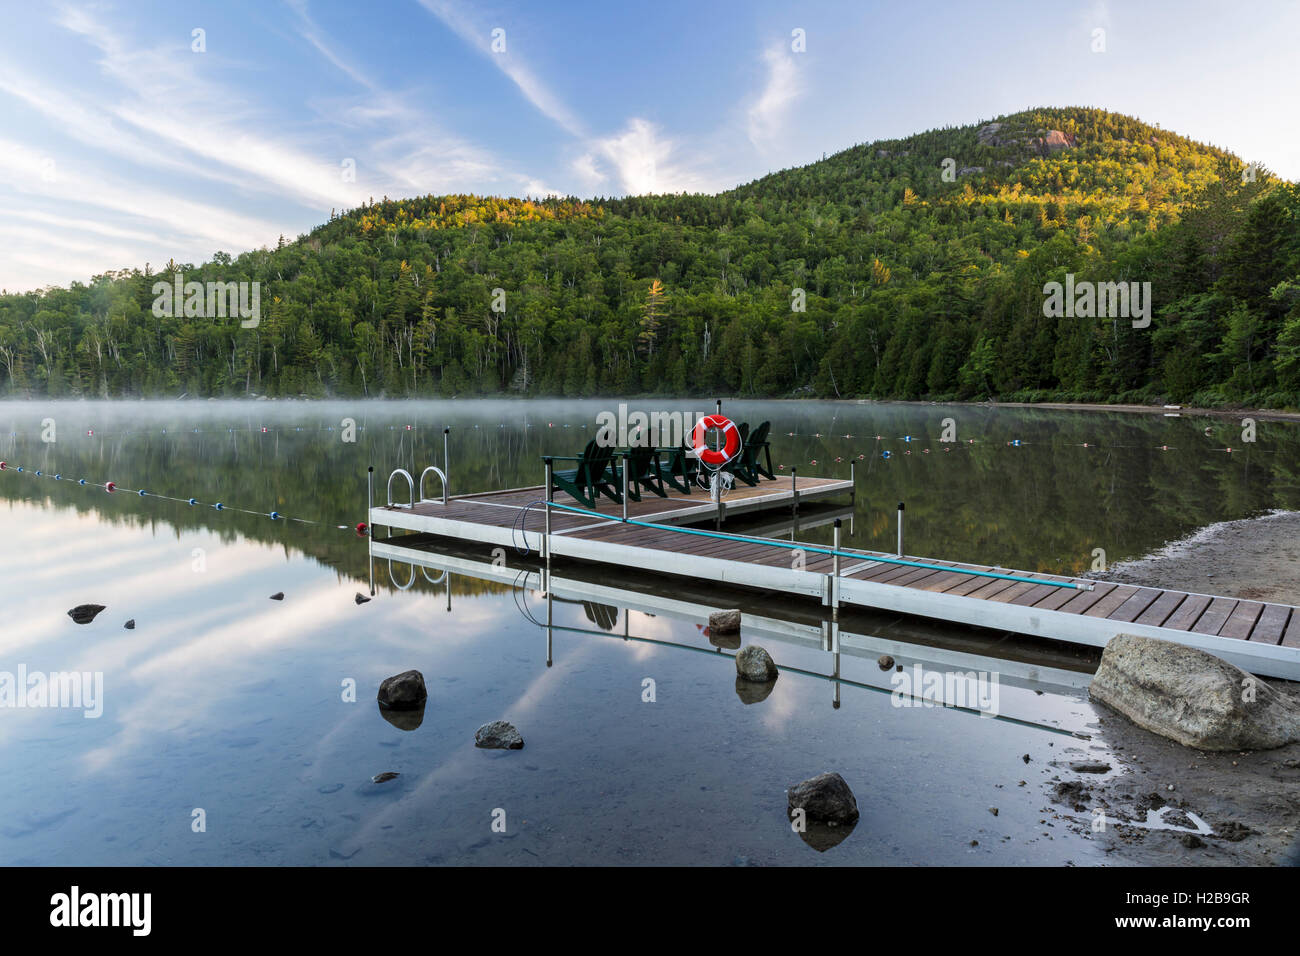 Mount Jo rises over the Heart Lake dock on a misty morning in the High Peaks region of the Adirondacks near Lake Placid, NY Stock Photo